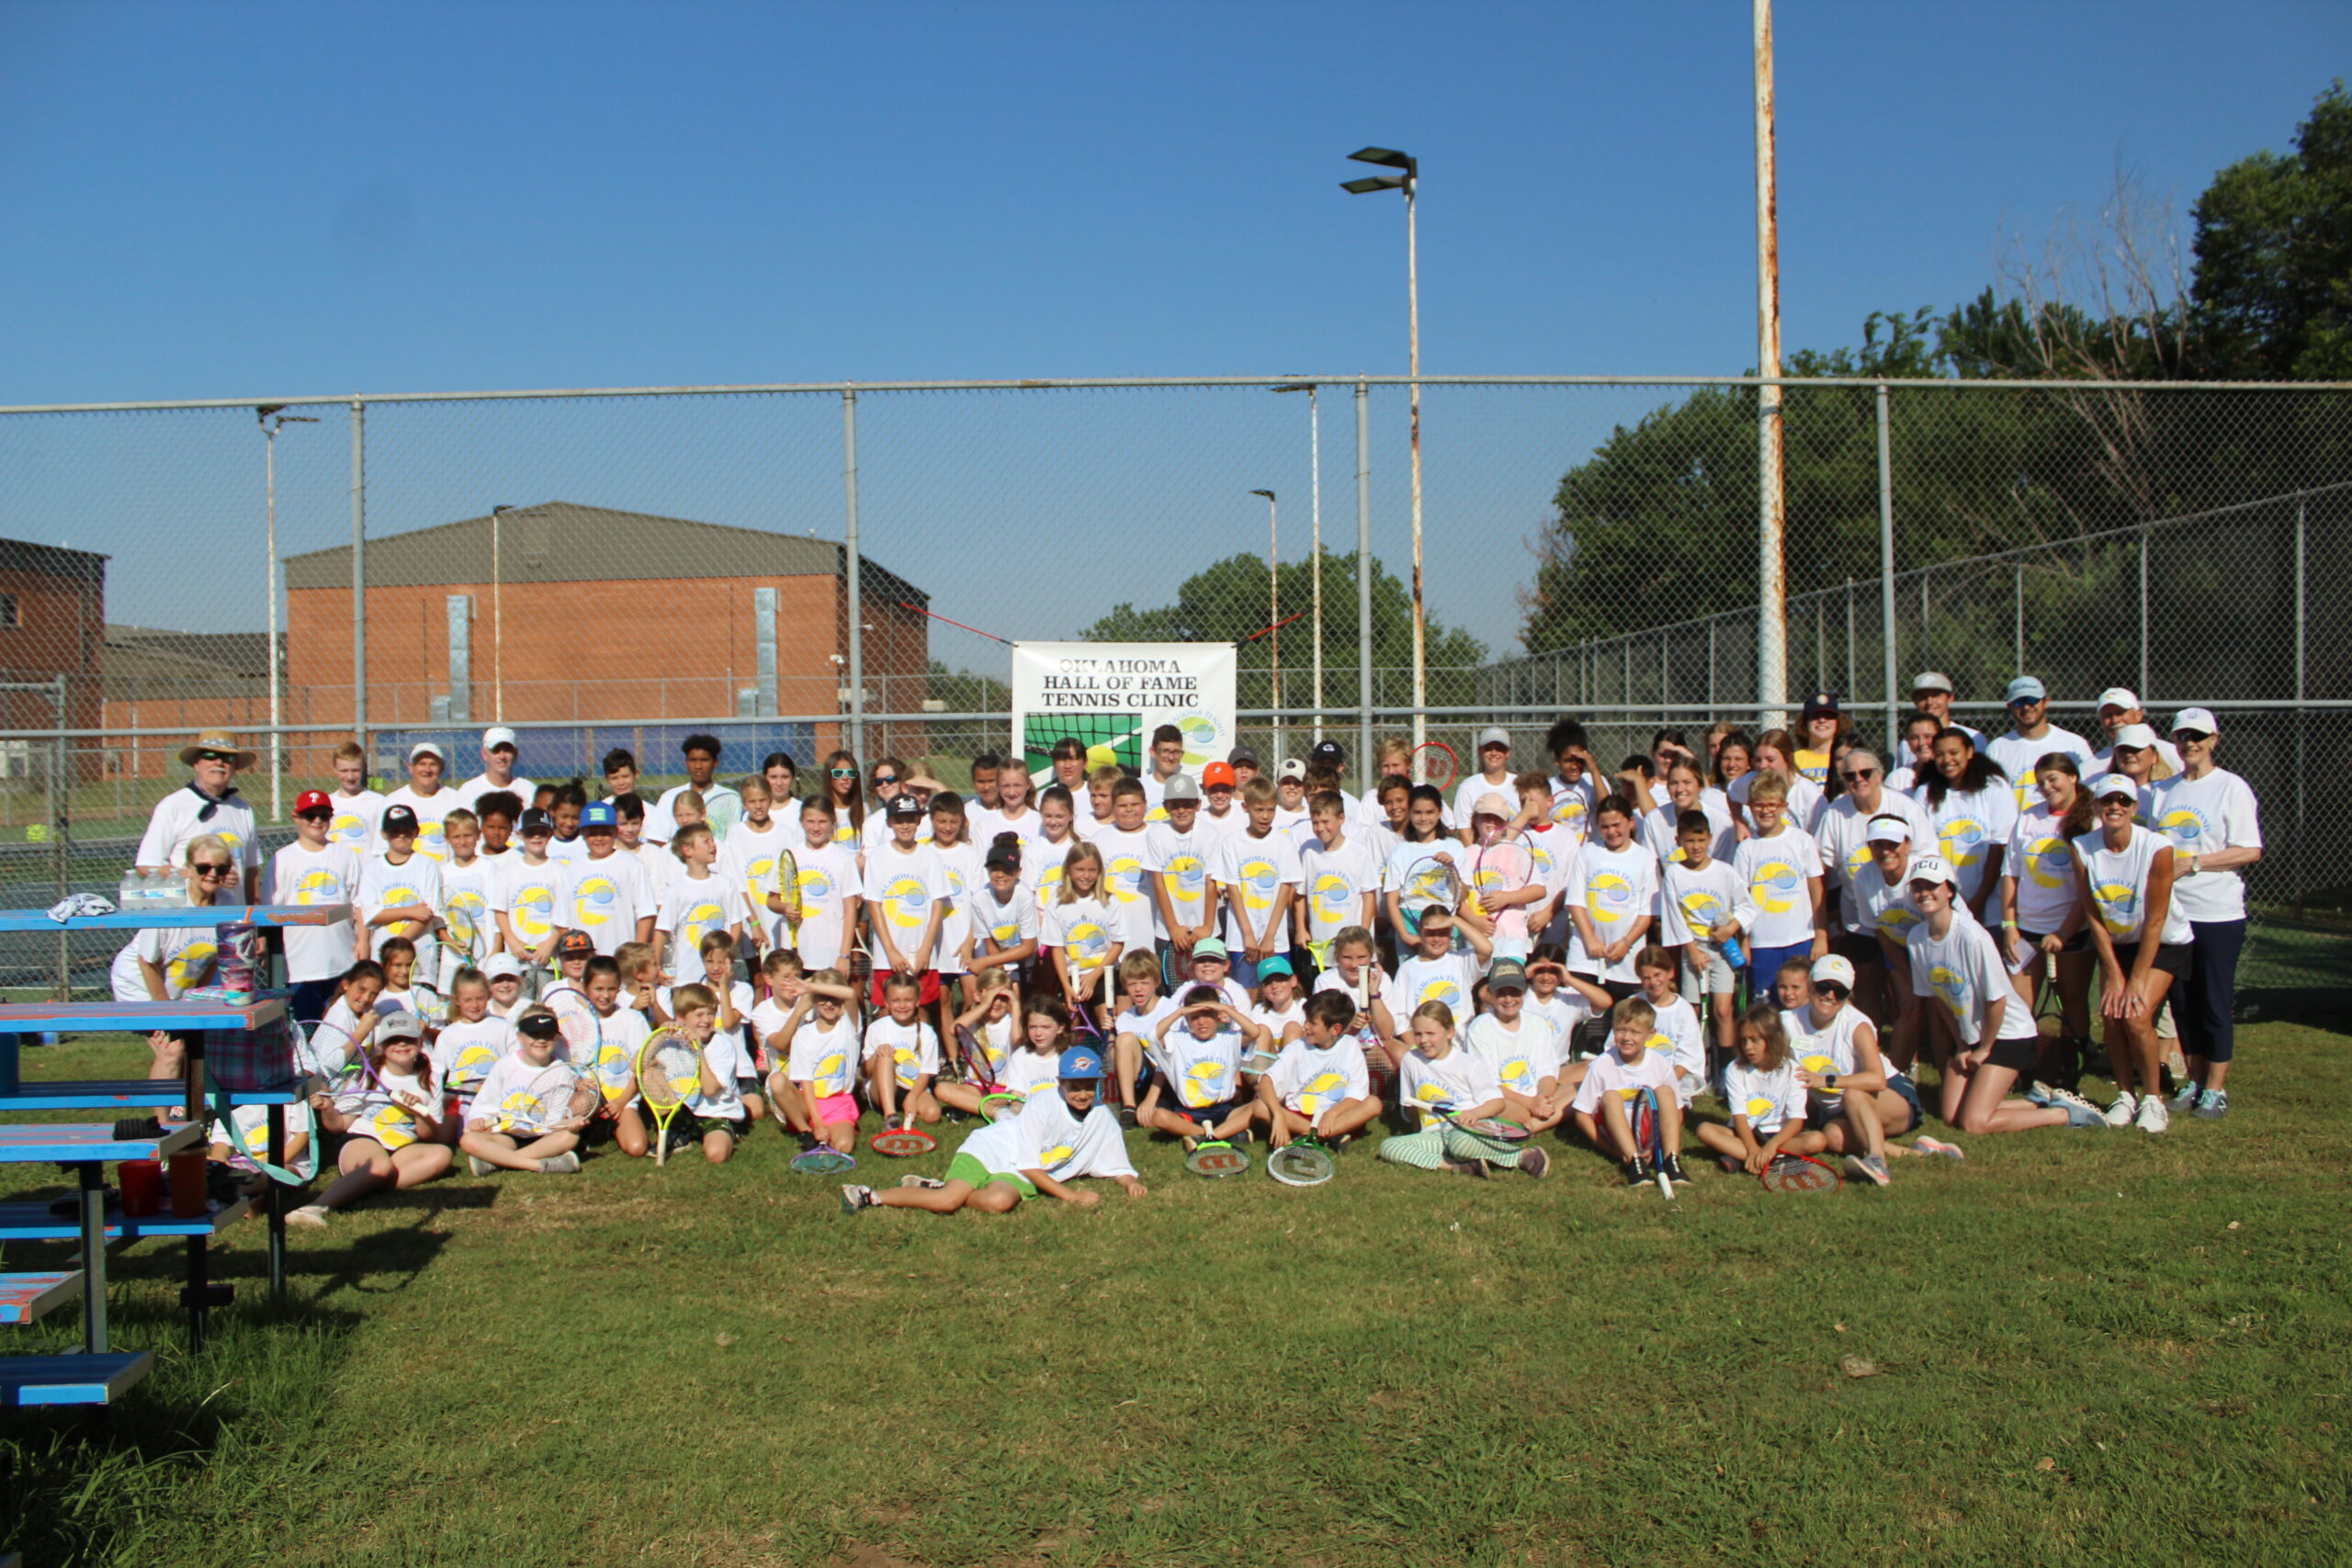 2022 Oklahoma Tennis Hall of Fame Clinic in Guthrie, OK 
(Logan County)